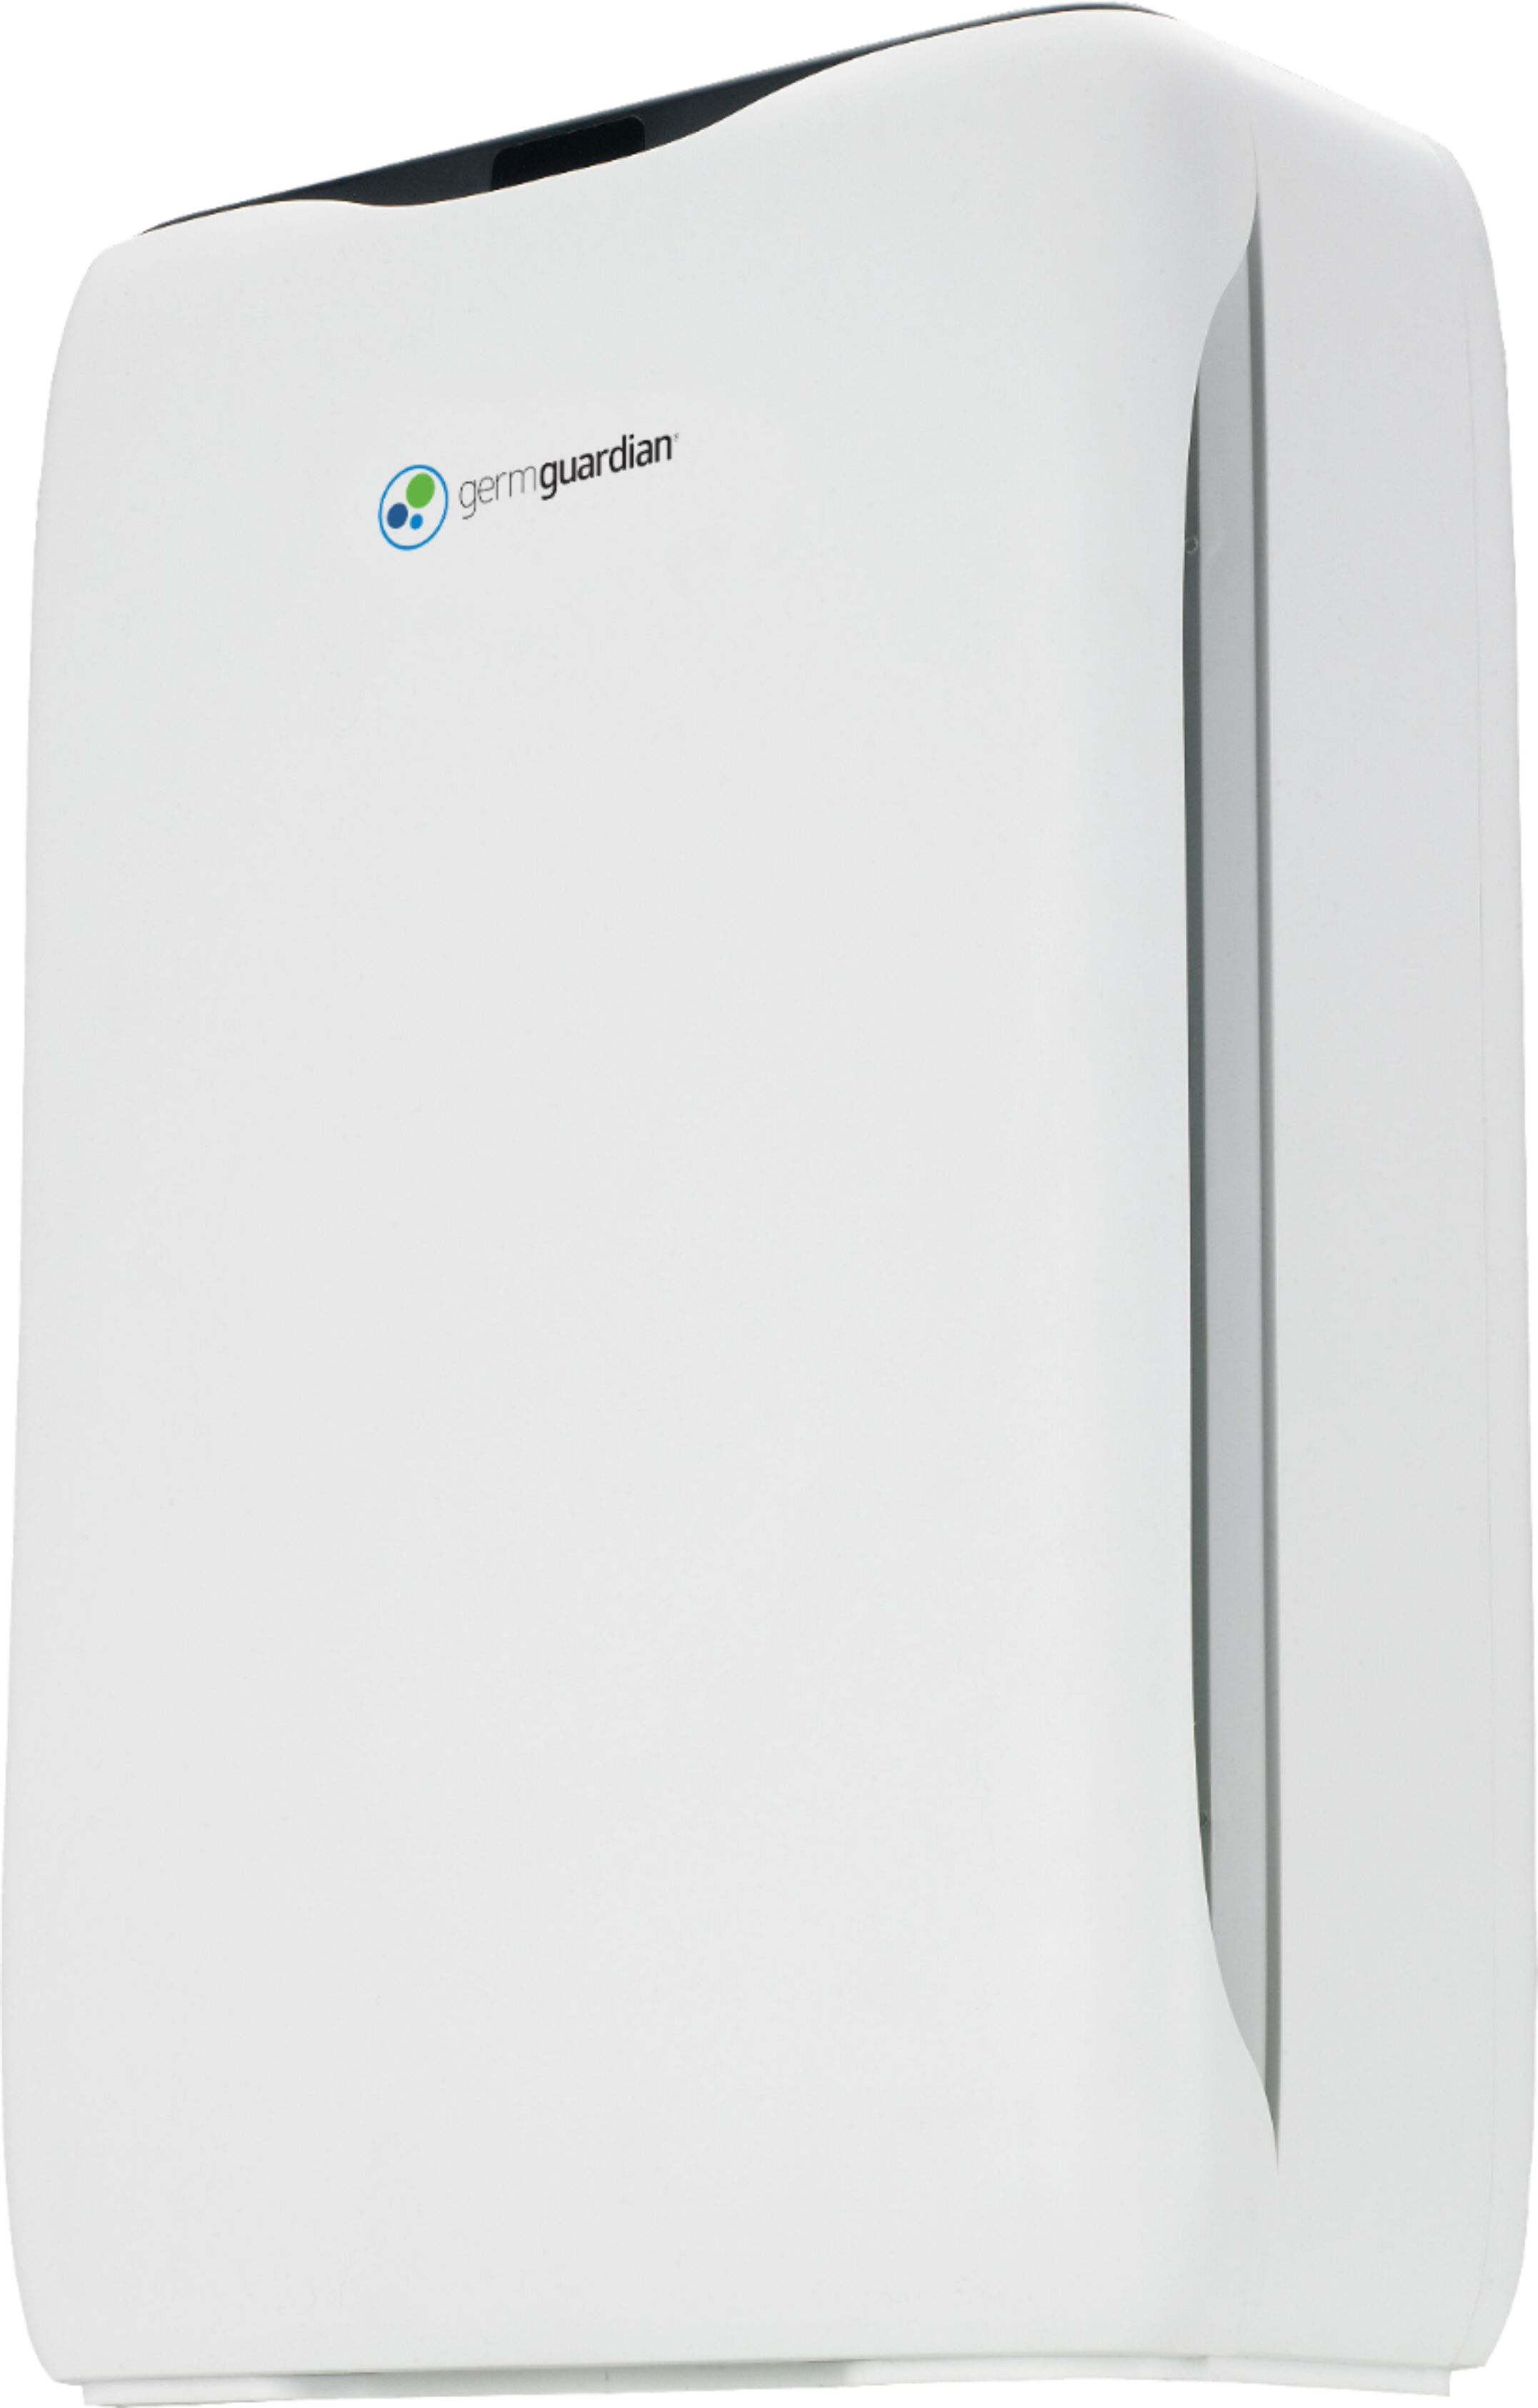 Angle View: GermGuardian - 105 Sq. Ft Tabletop Air Purifier - White